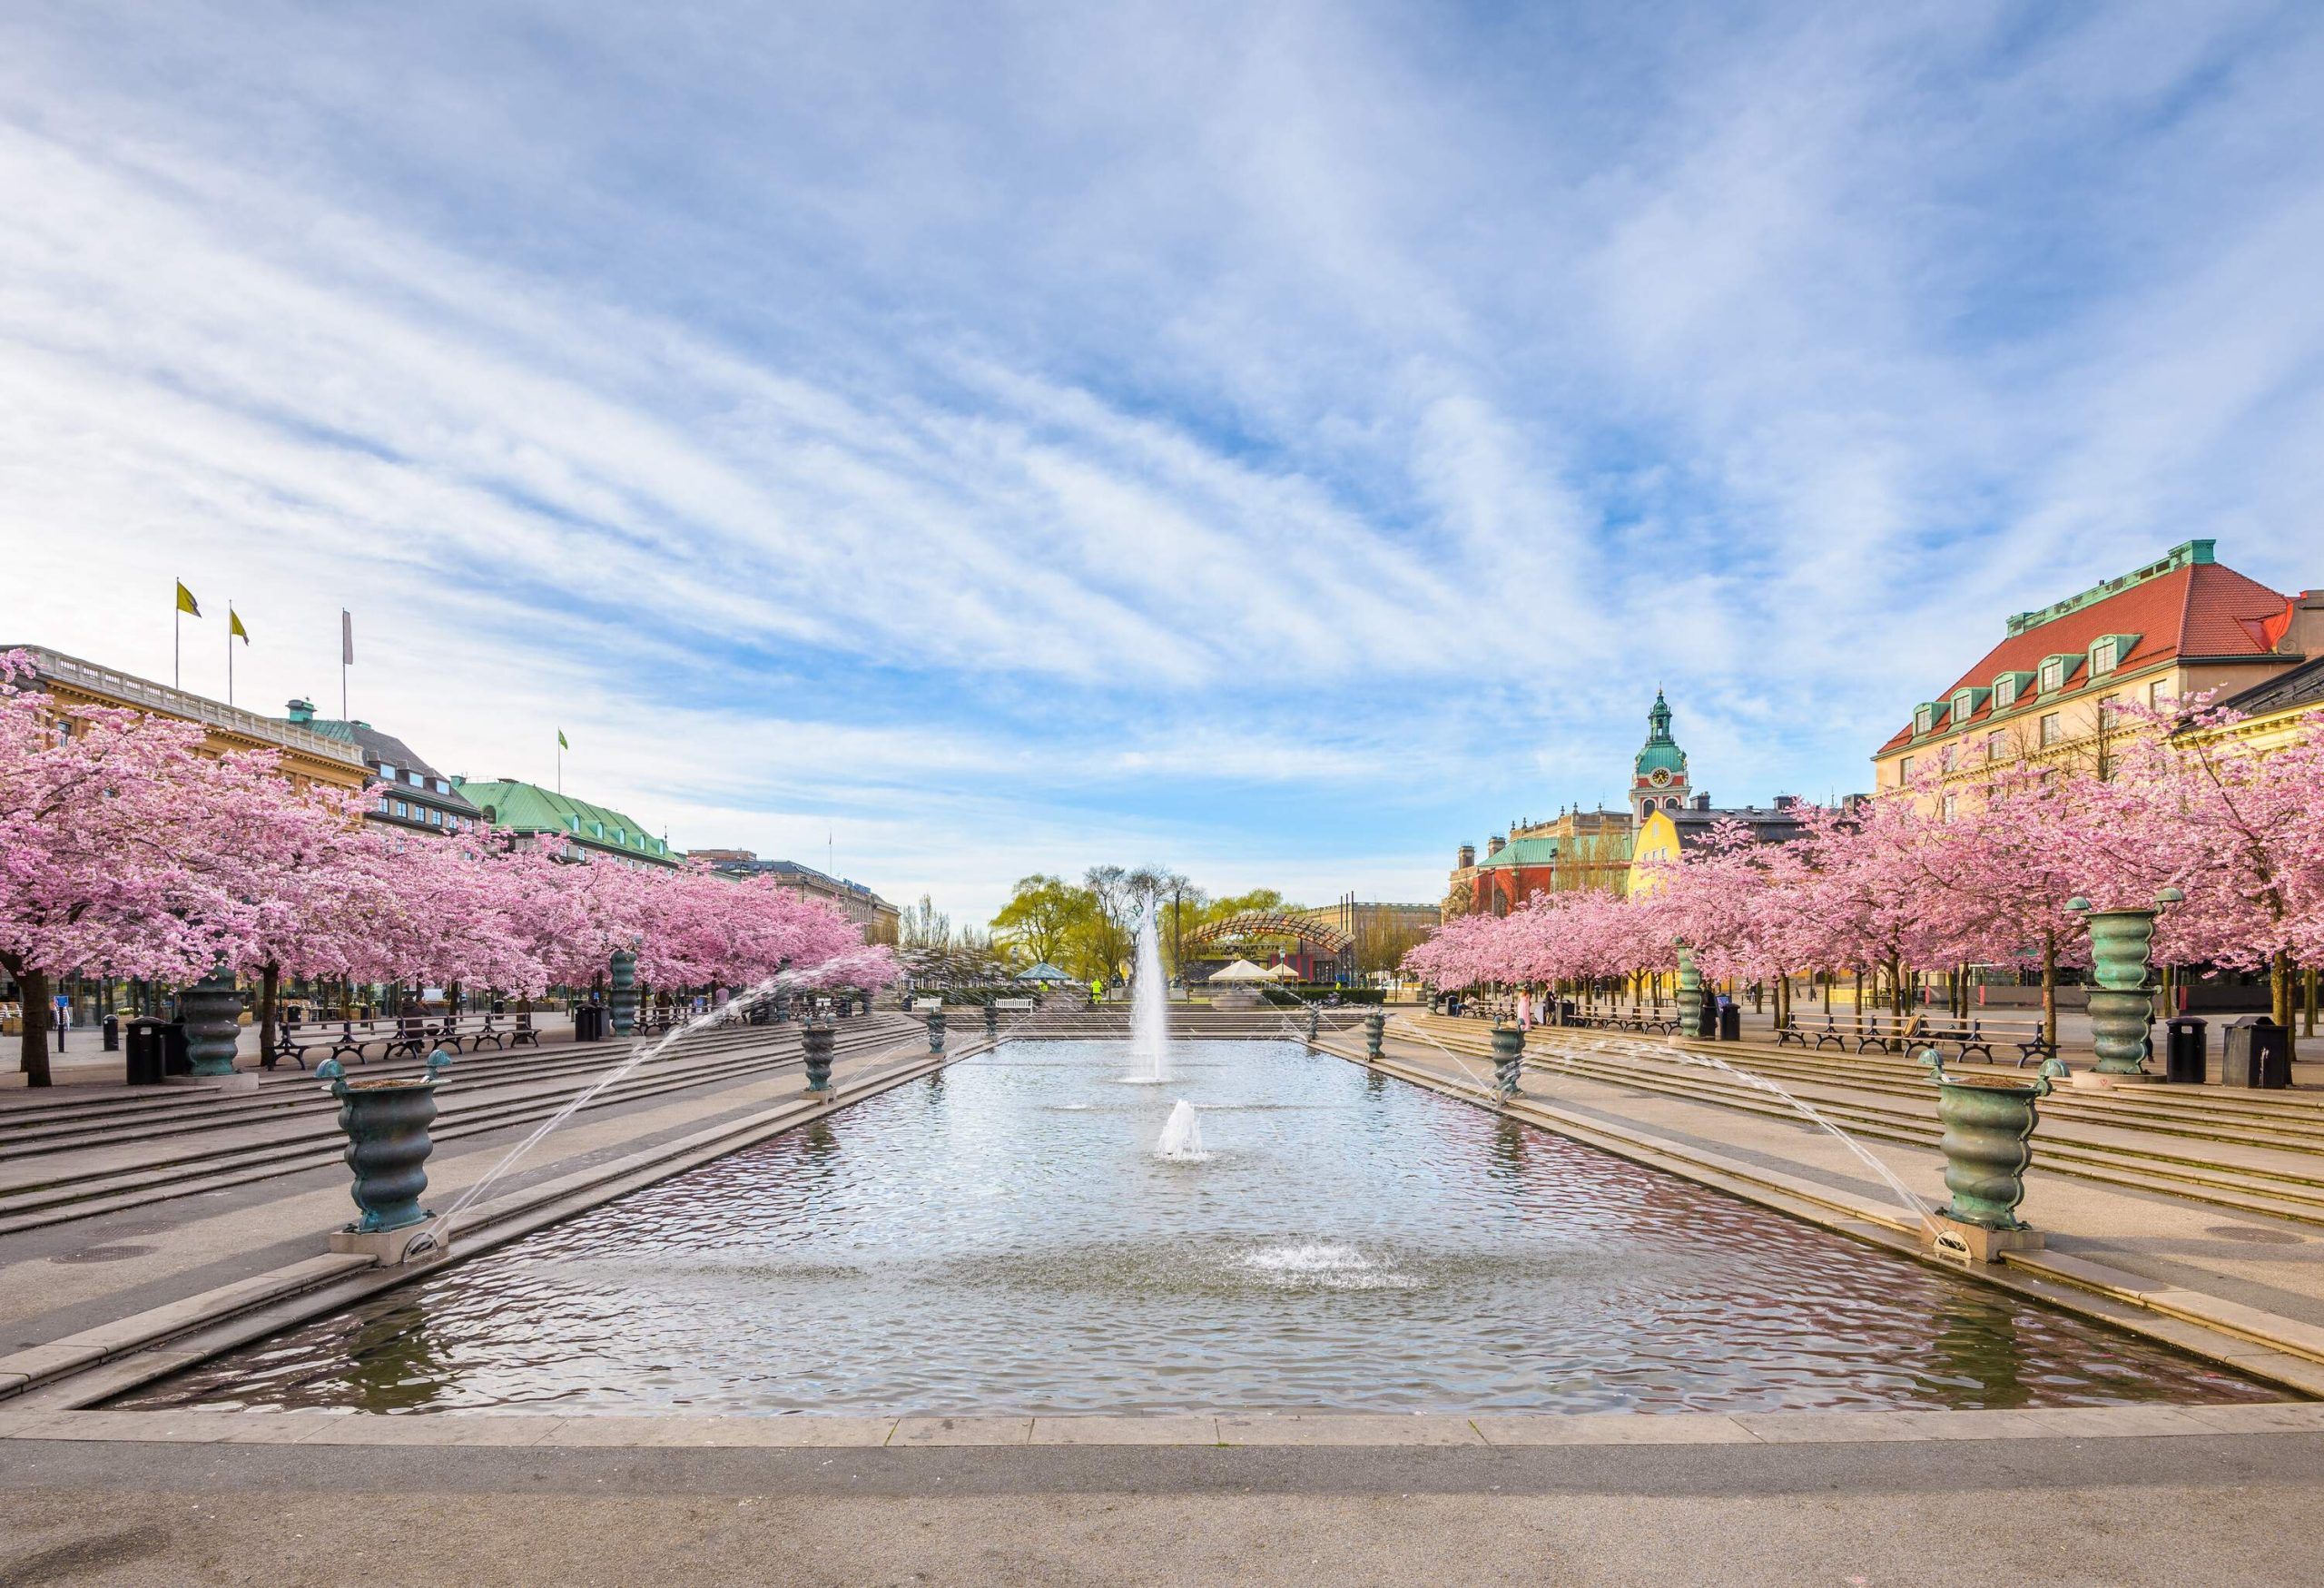 A park pond with fountains surrounded by beautiful cherry trees in blossoms.